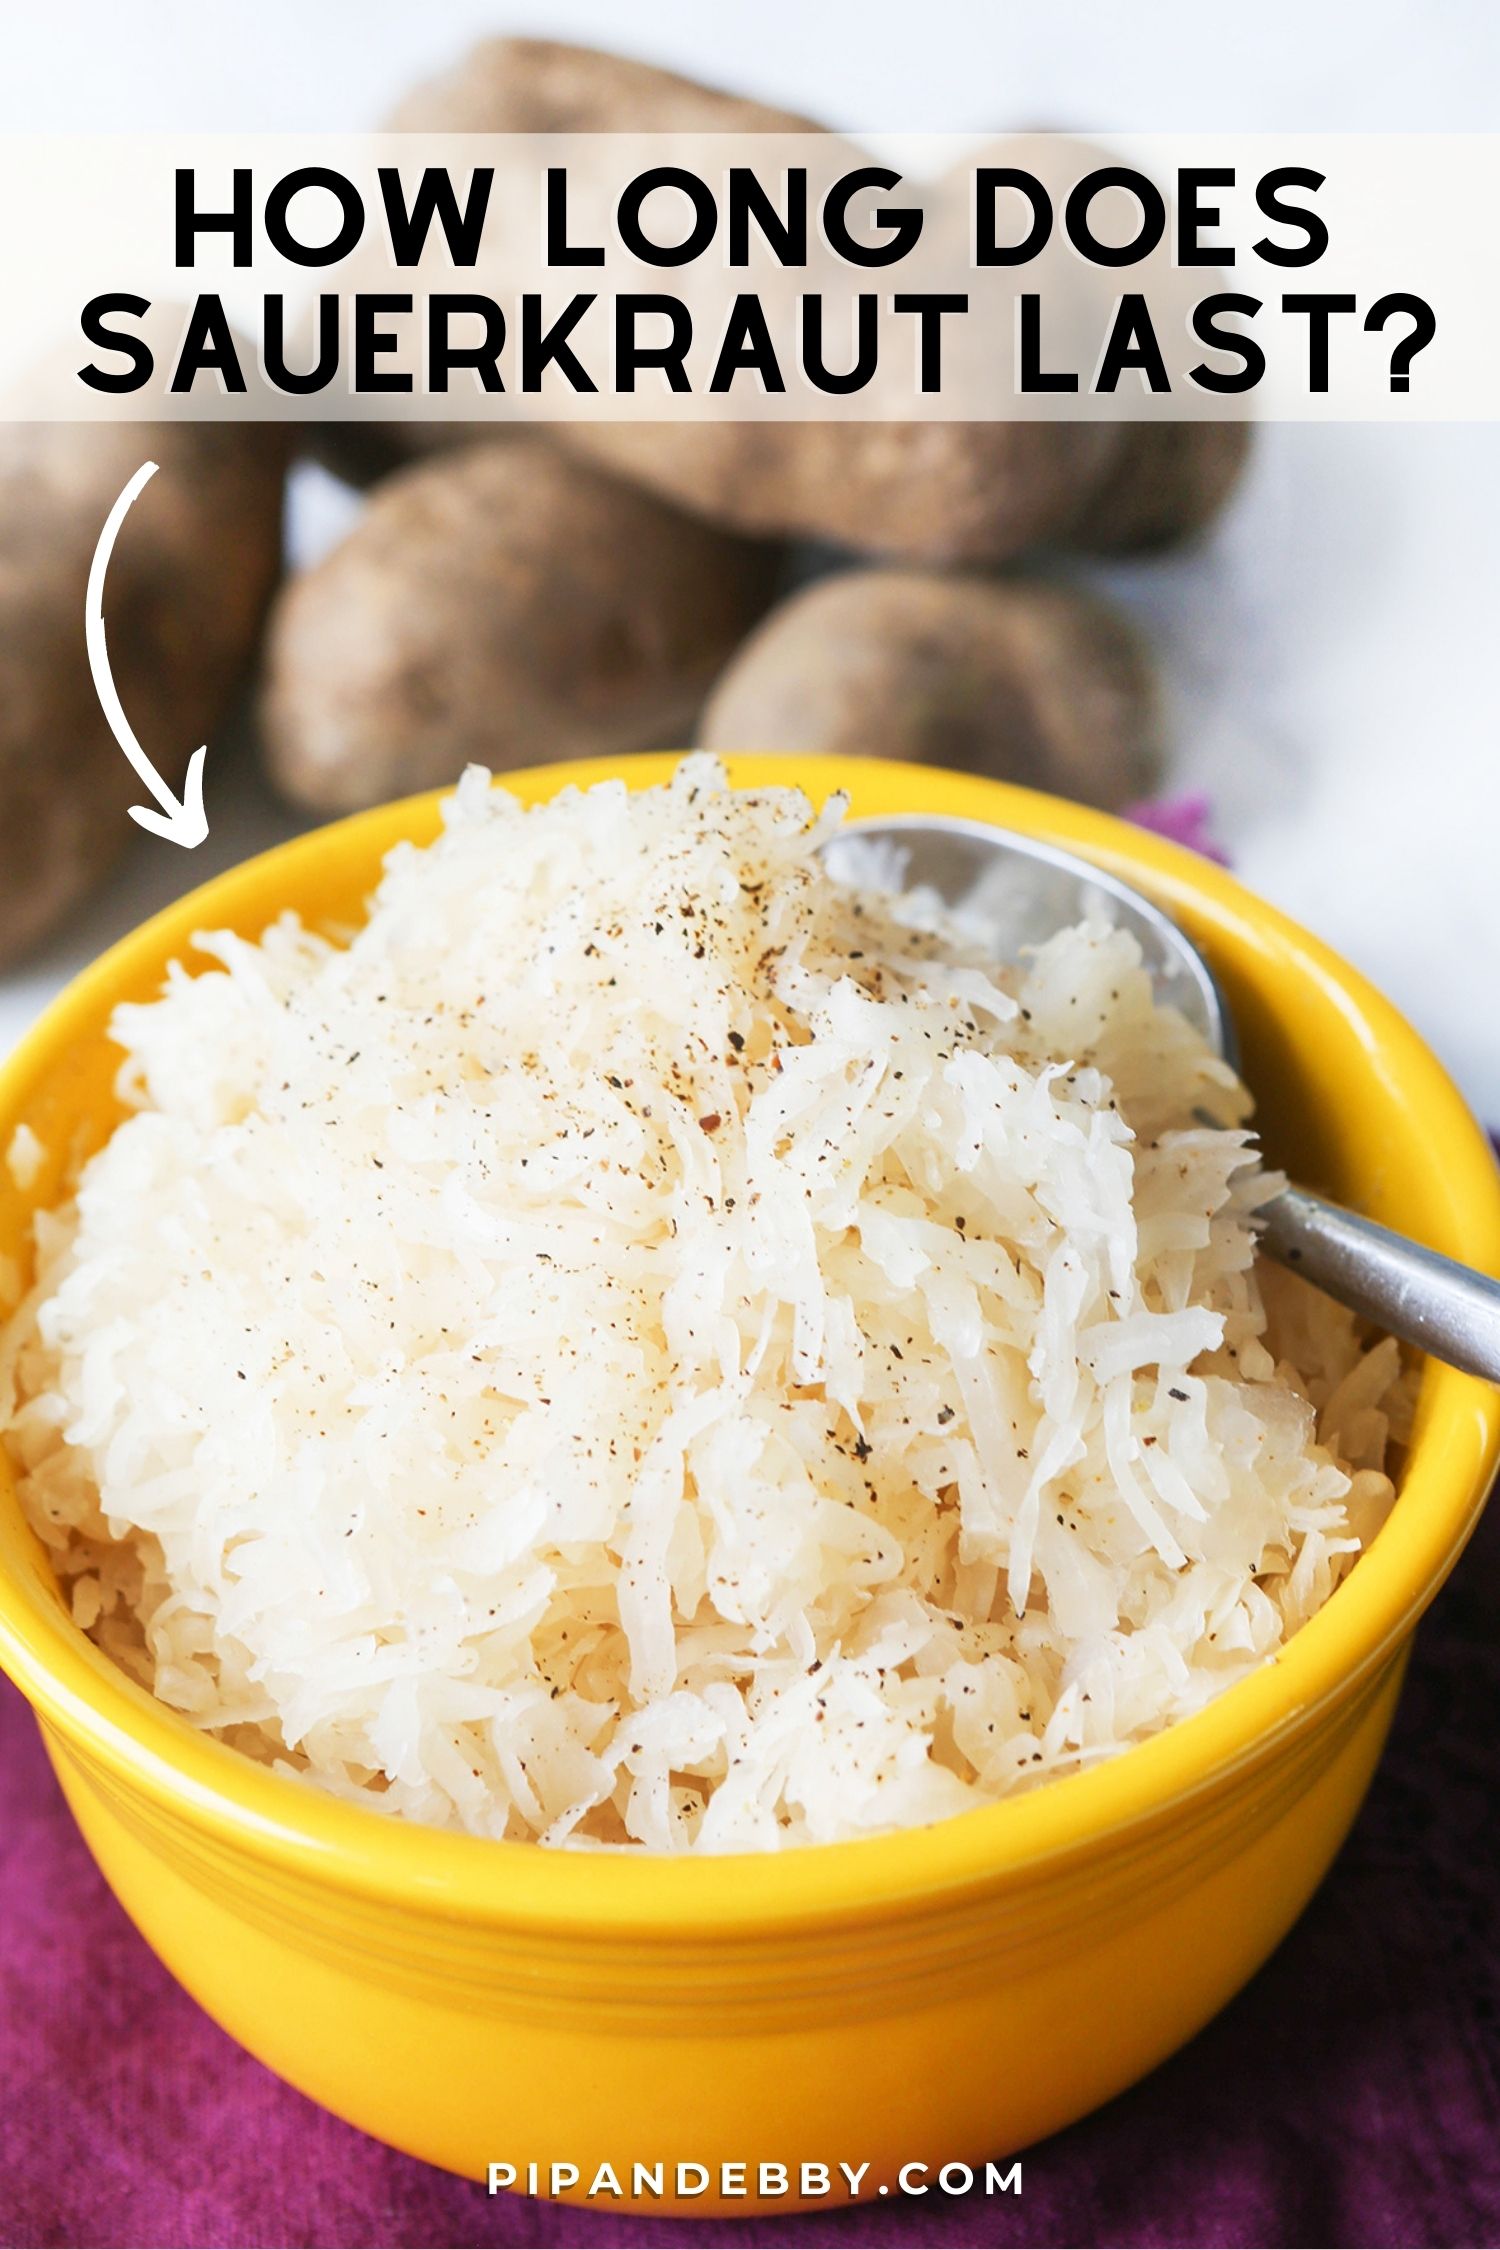 Photo of a bowl of sauerkraut with text overlay reading, "How long does sauerkraut last?"